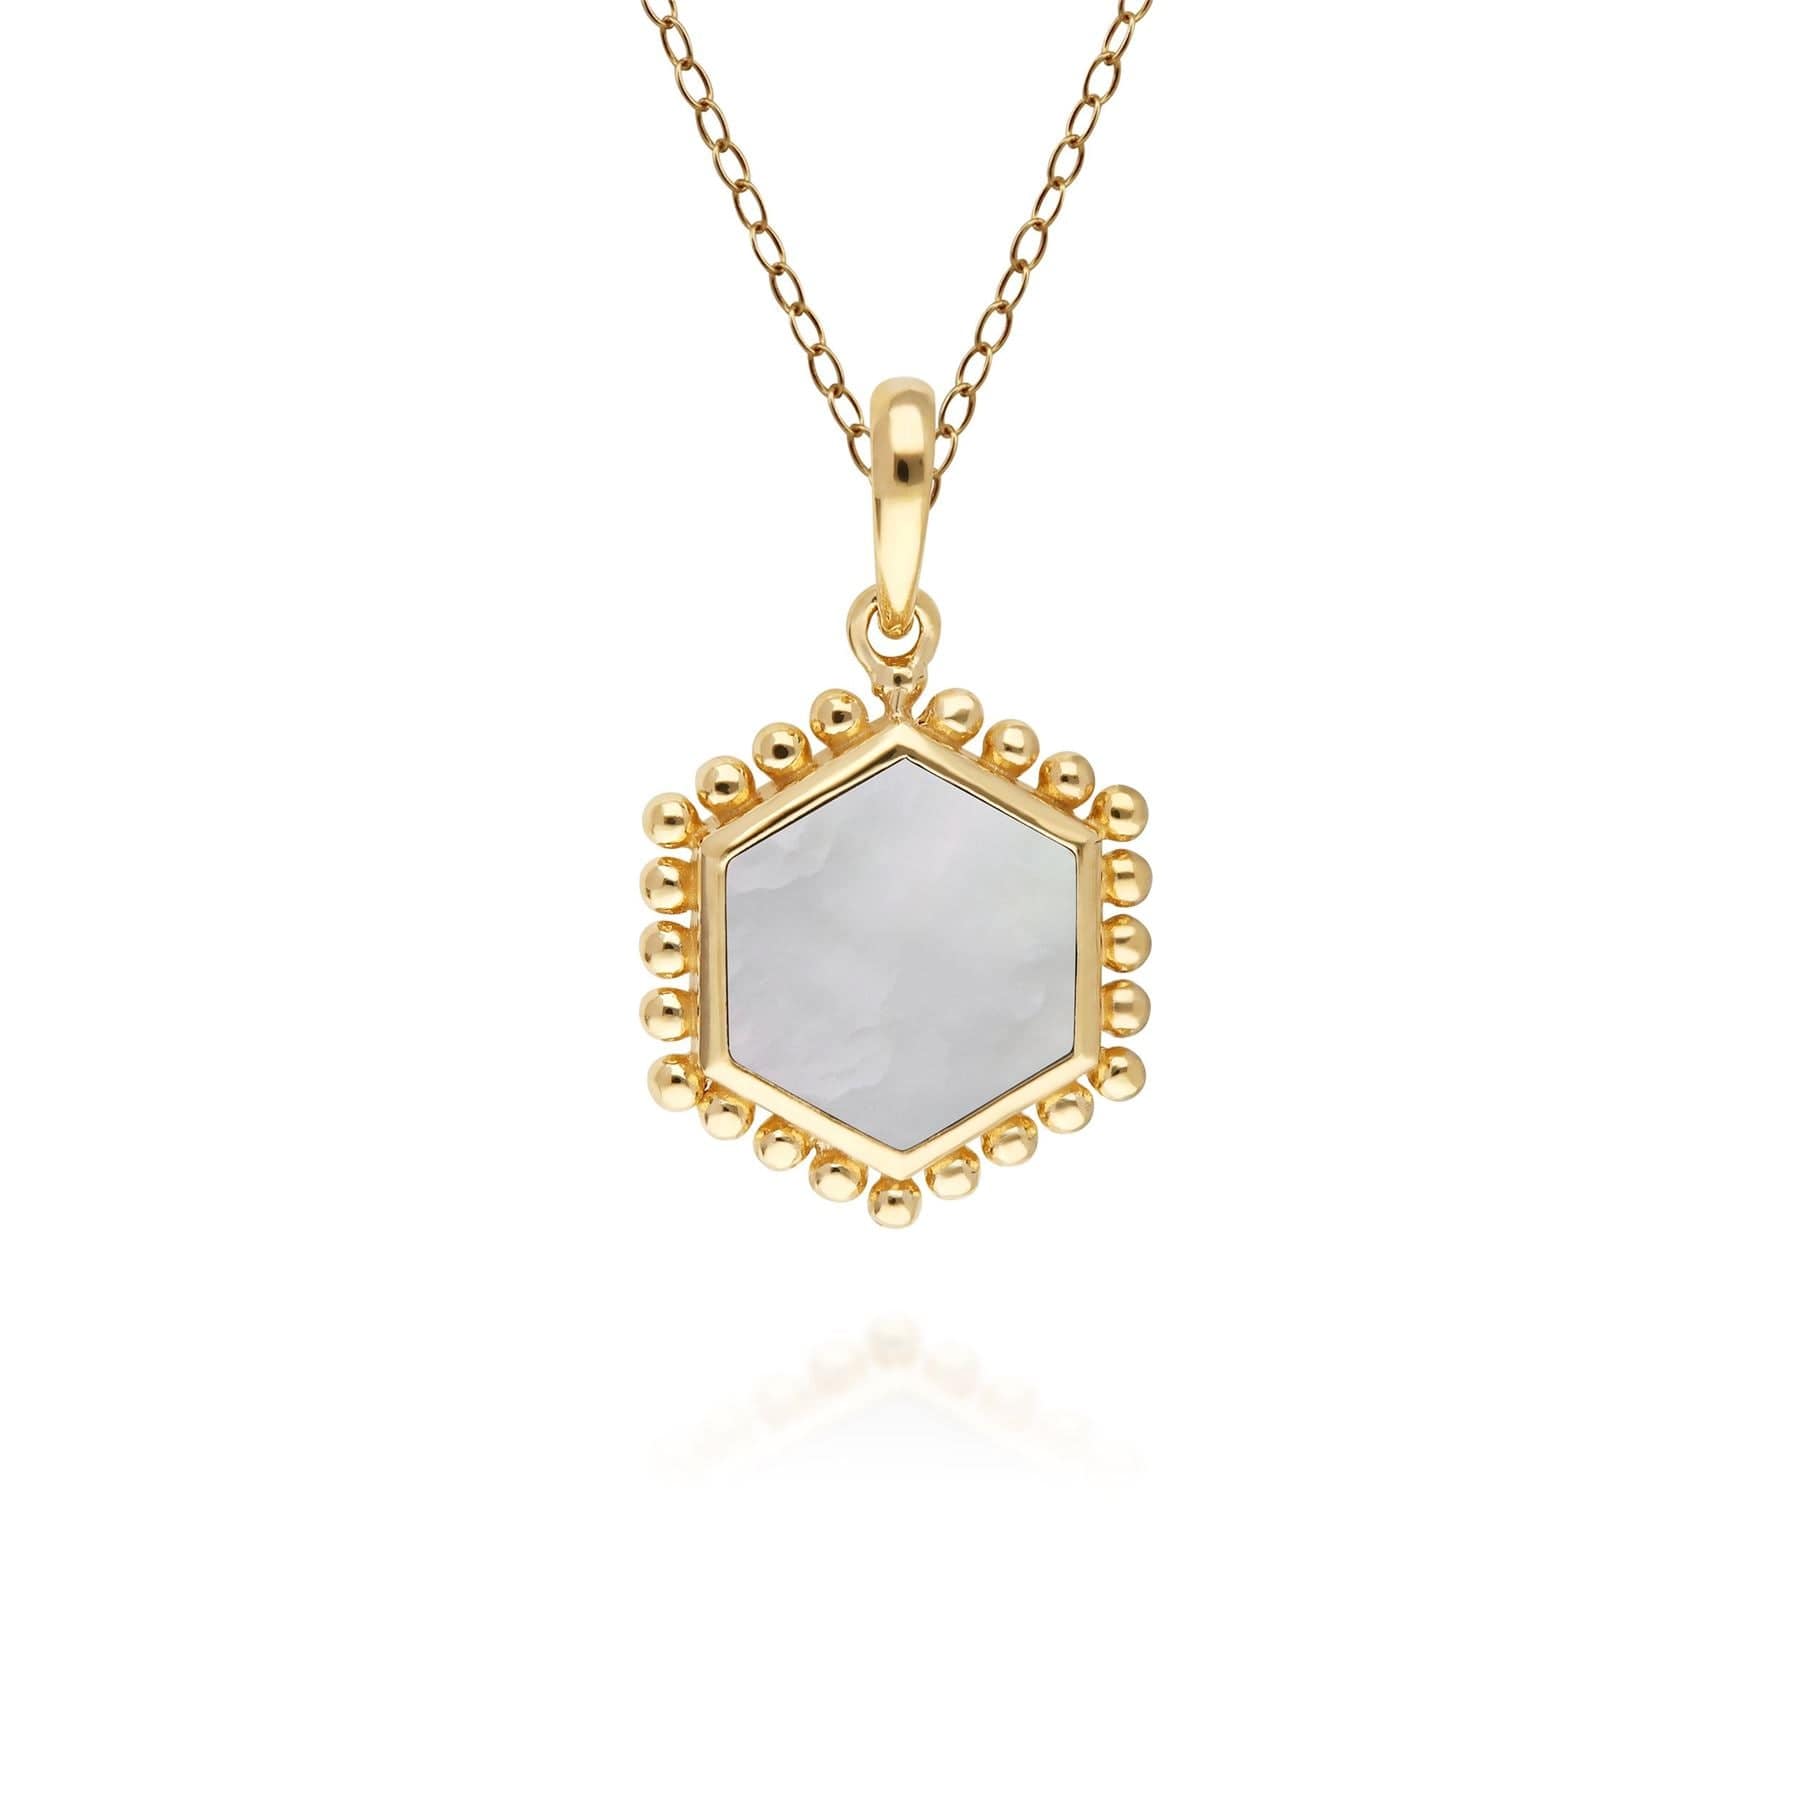 Photos - Pendant / Choker Necklace Mother of Pearl Flat Slice Hex Pendant in Gold Plated Sterling Silver